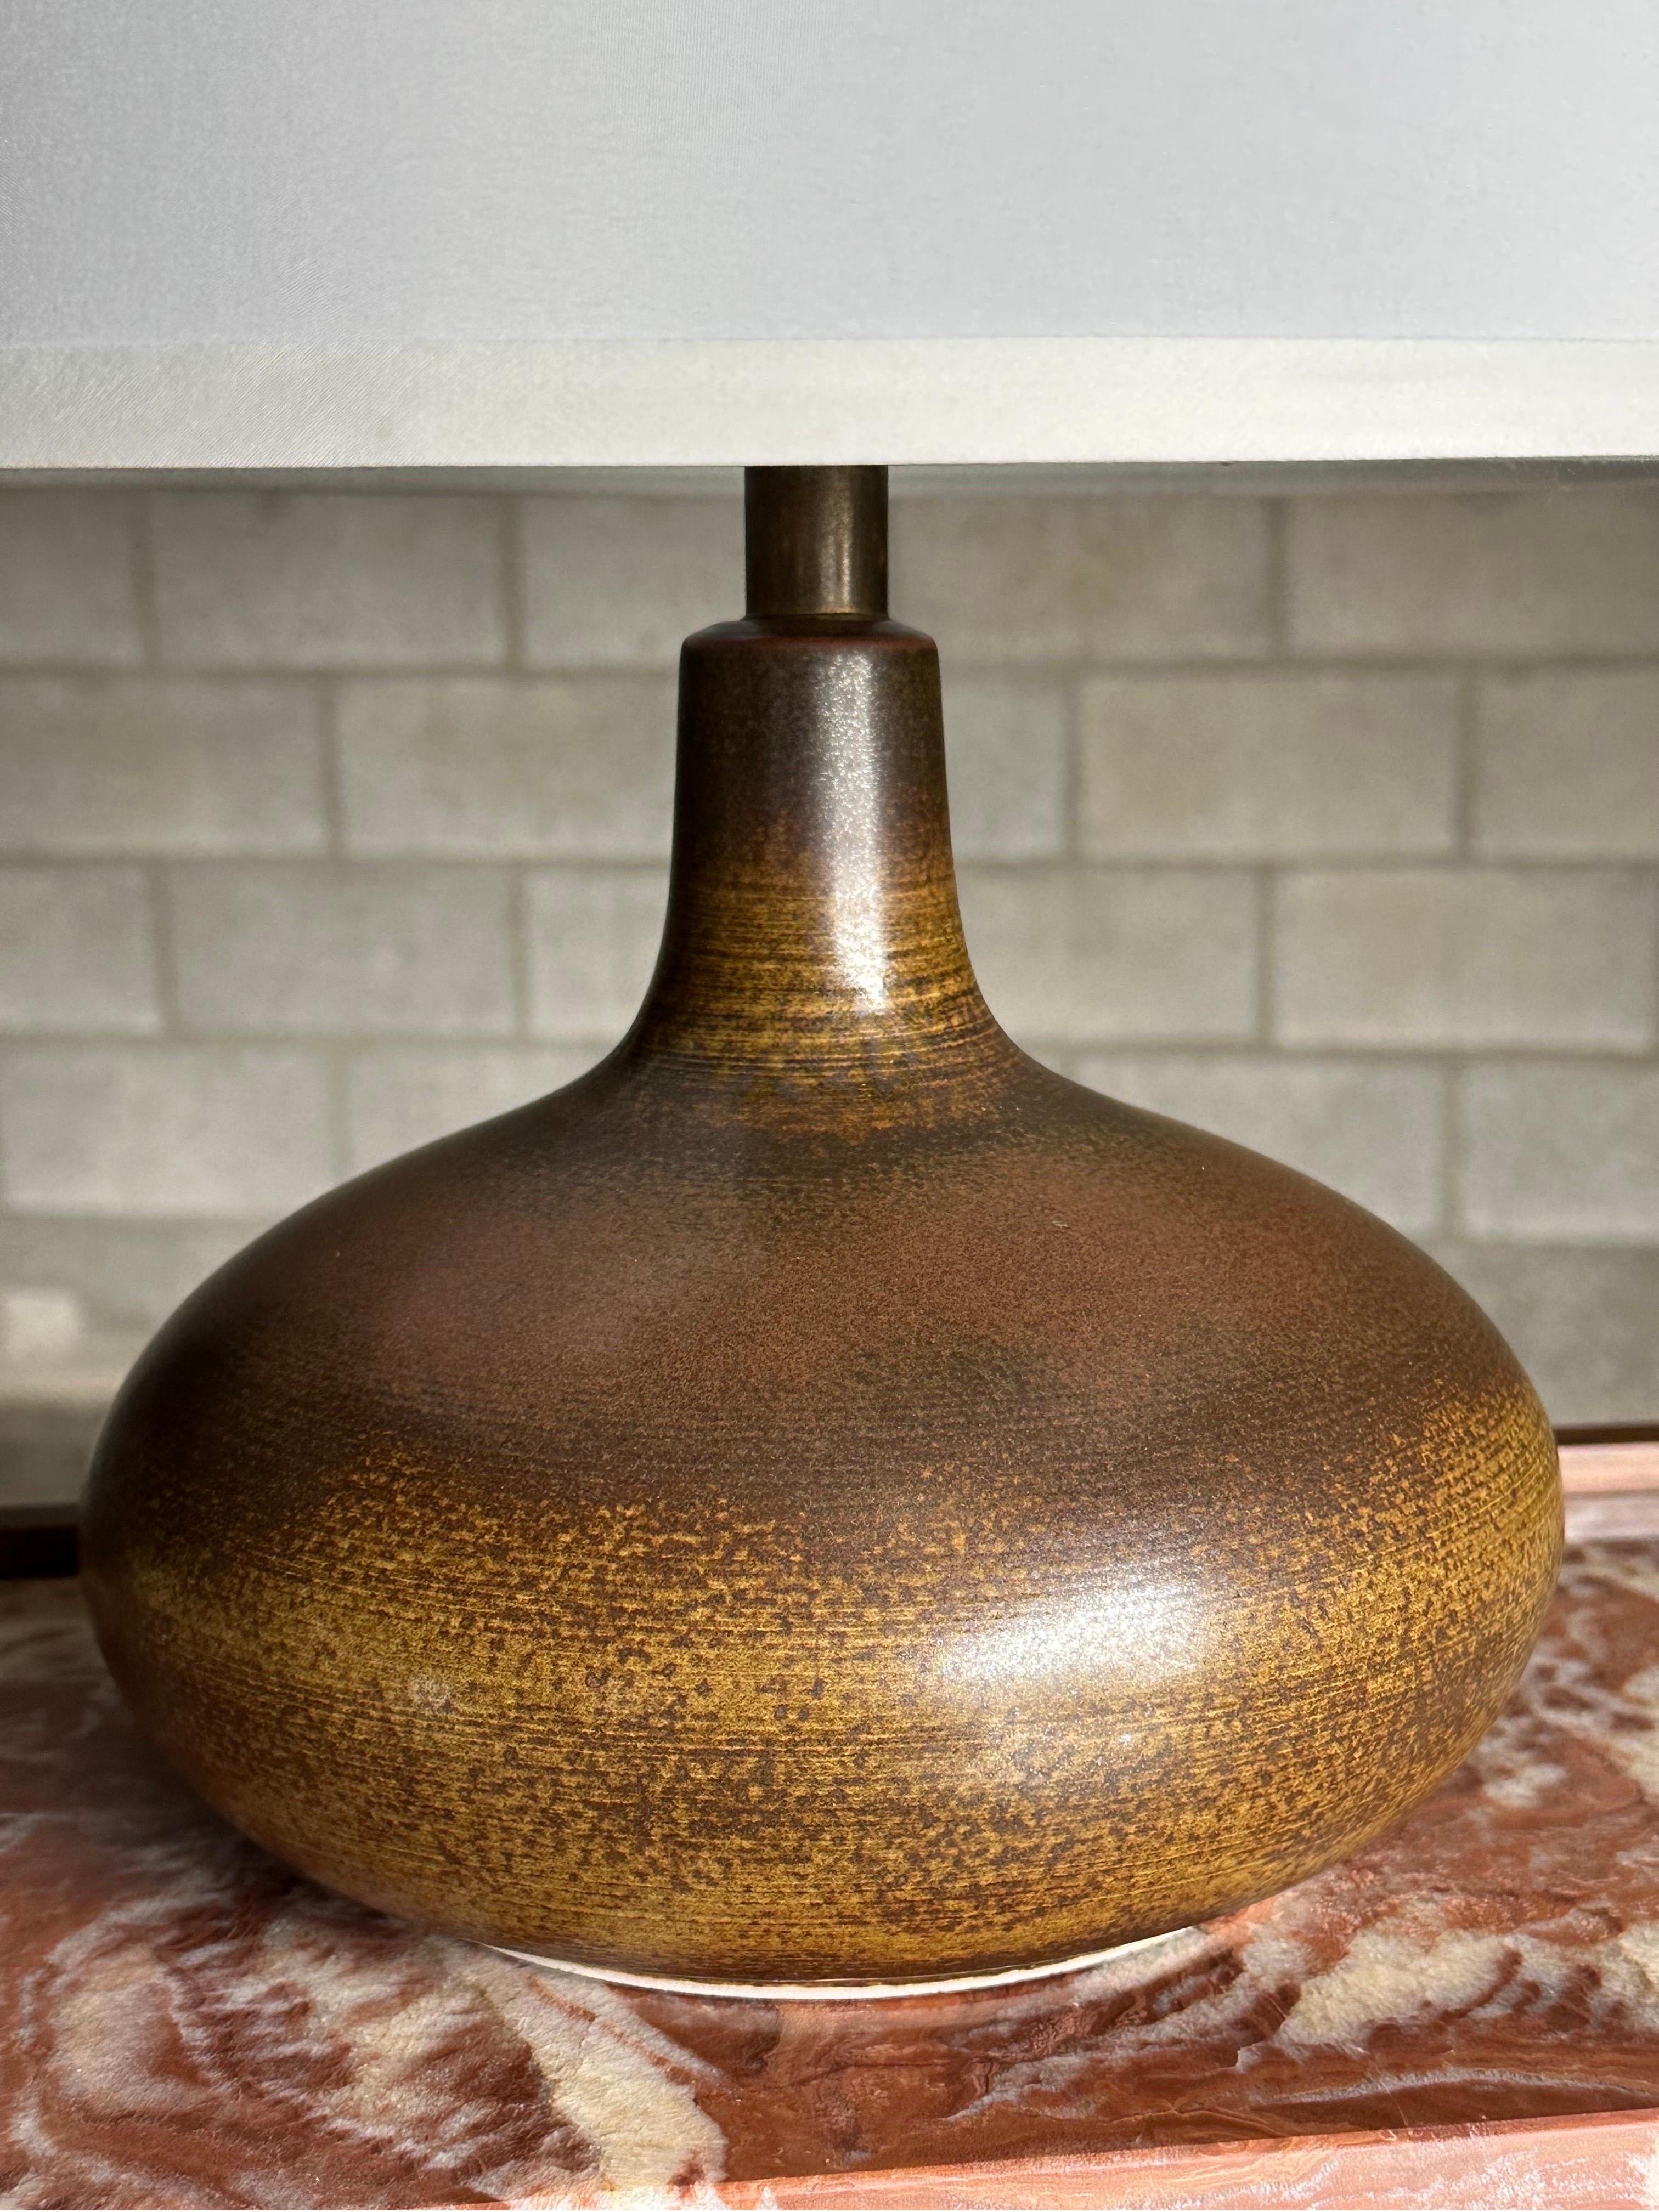 Large table lamp by Lotte and Gunnar Bostlund. While produced in Canada and the US, the ceramicist duo were from Denmark. Very interesting glaze presenting as largely brown with traces of yellow and green.

Dimensions:
Overall 18